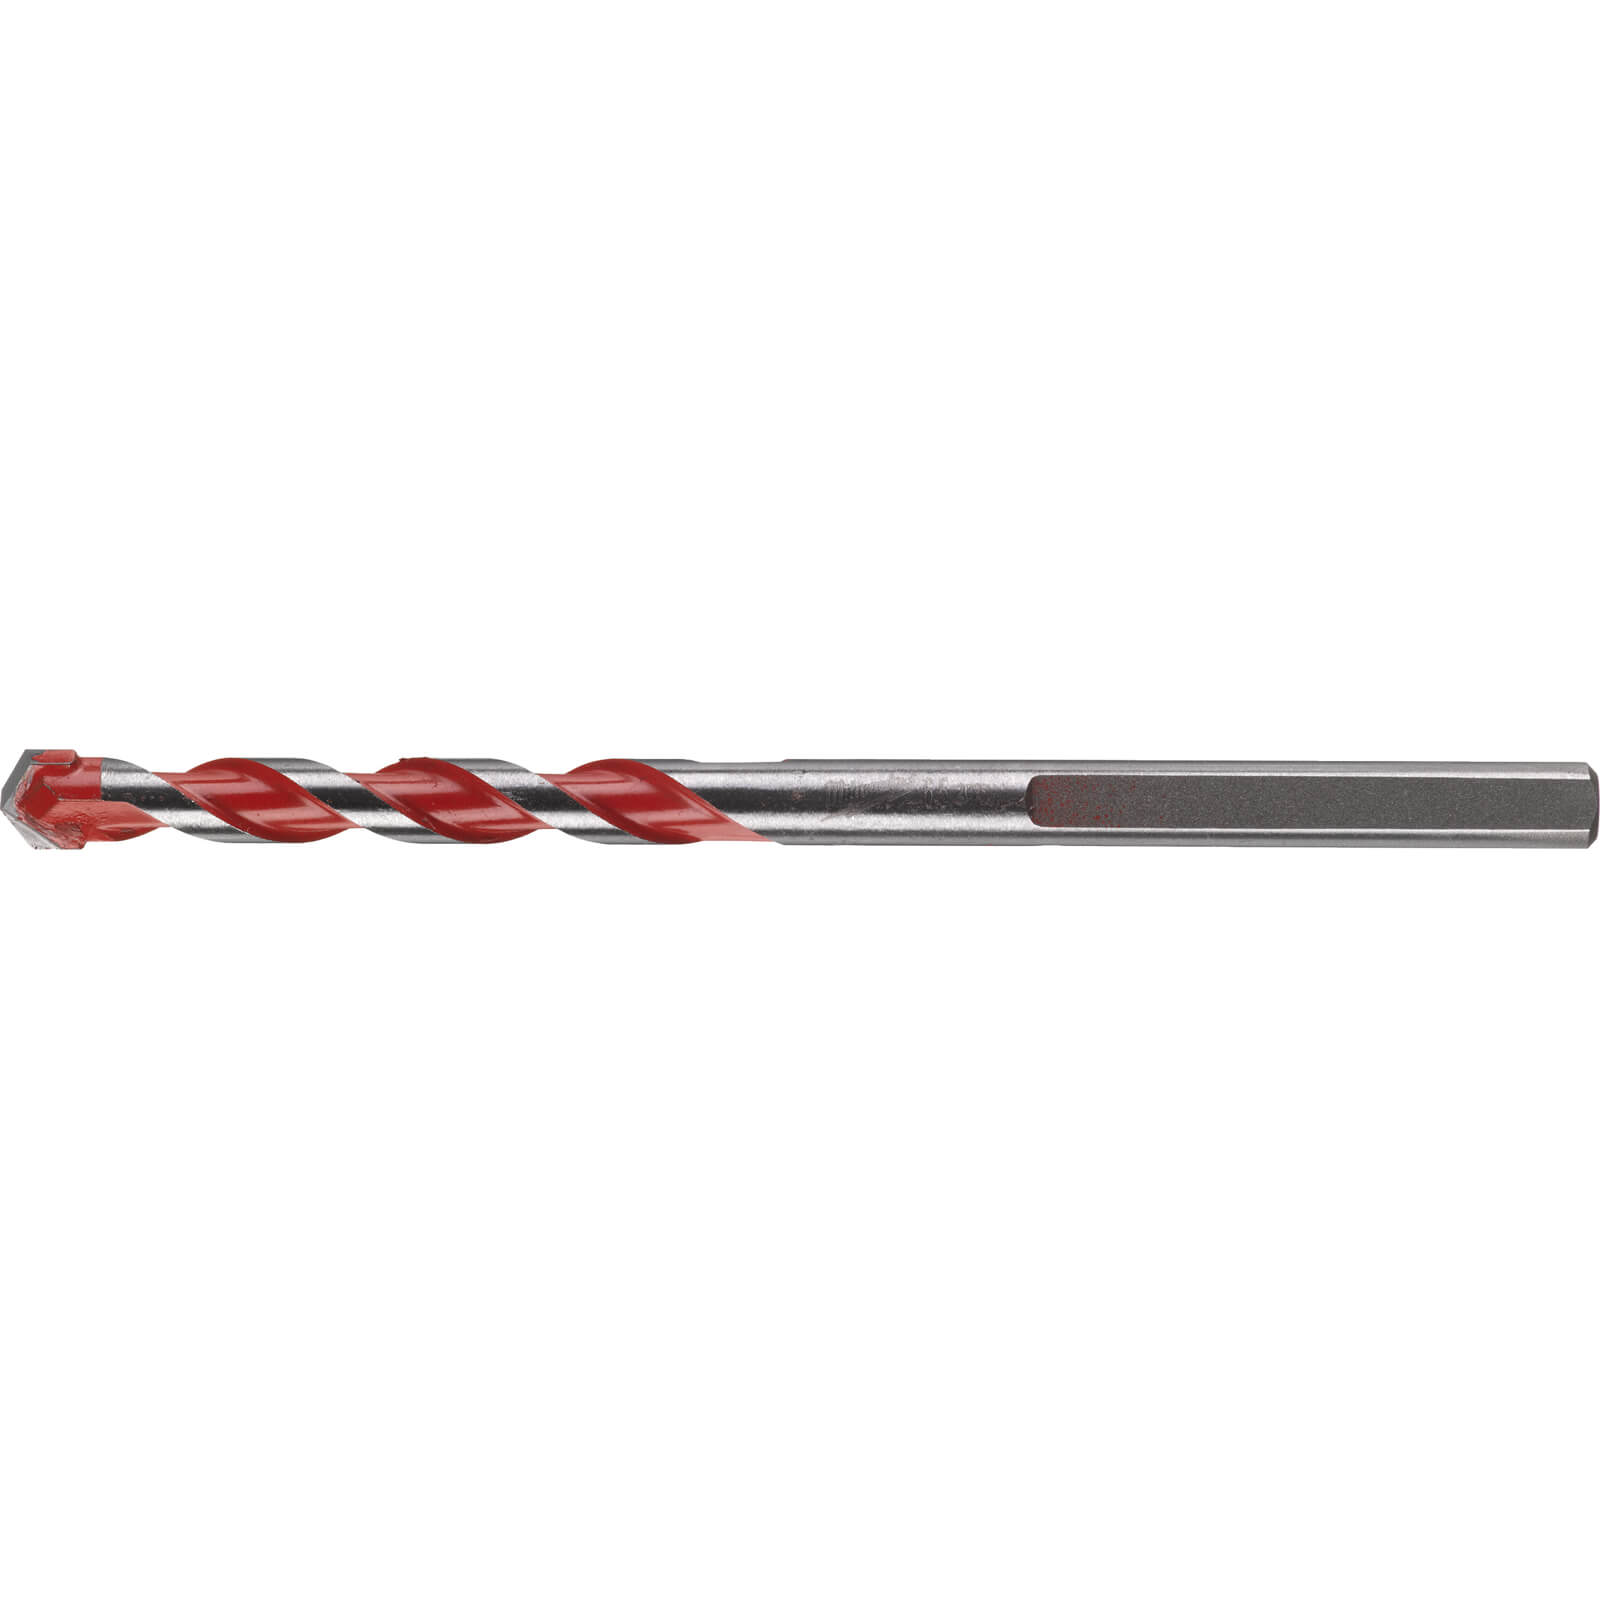 Image of Milwaukee Premium Concrete Drill 6.5mm 100mm Pack of 1